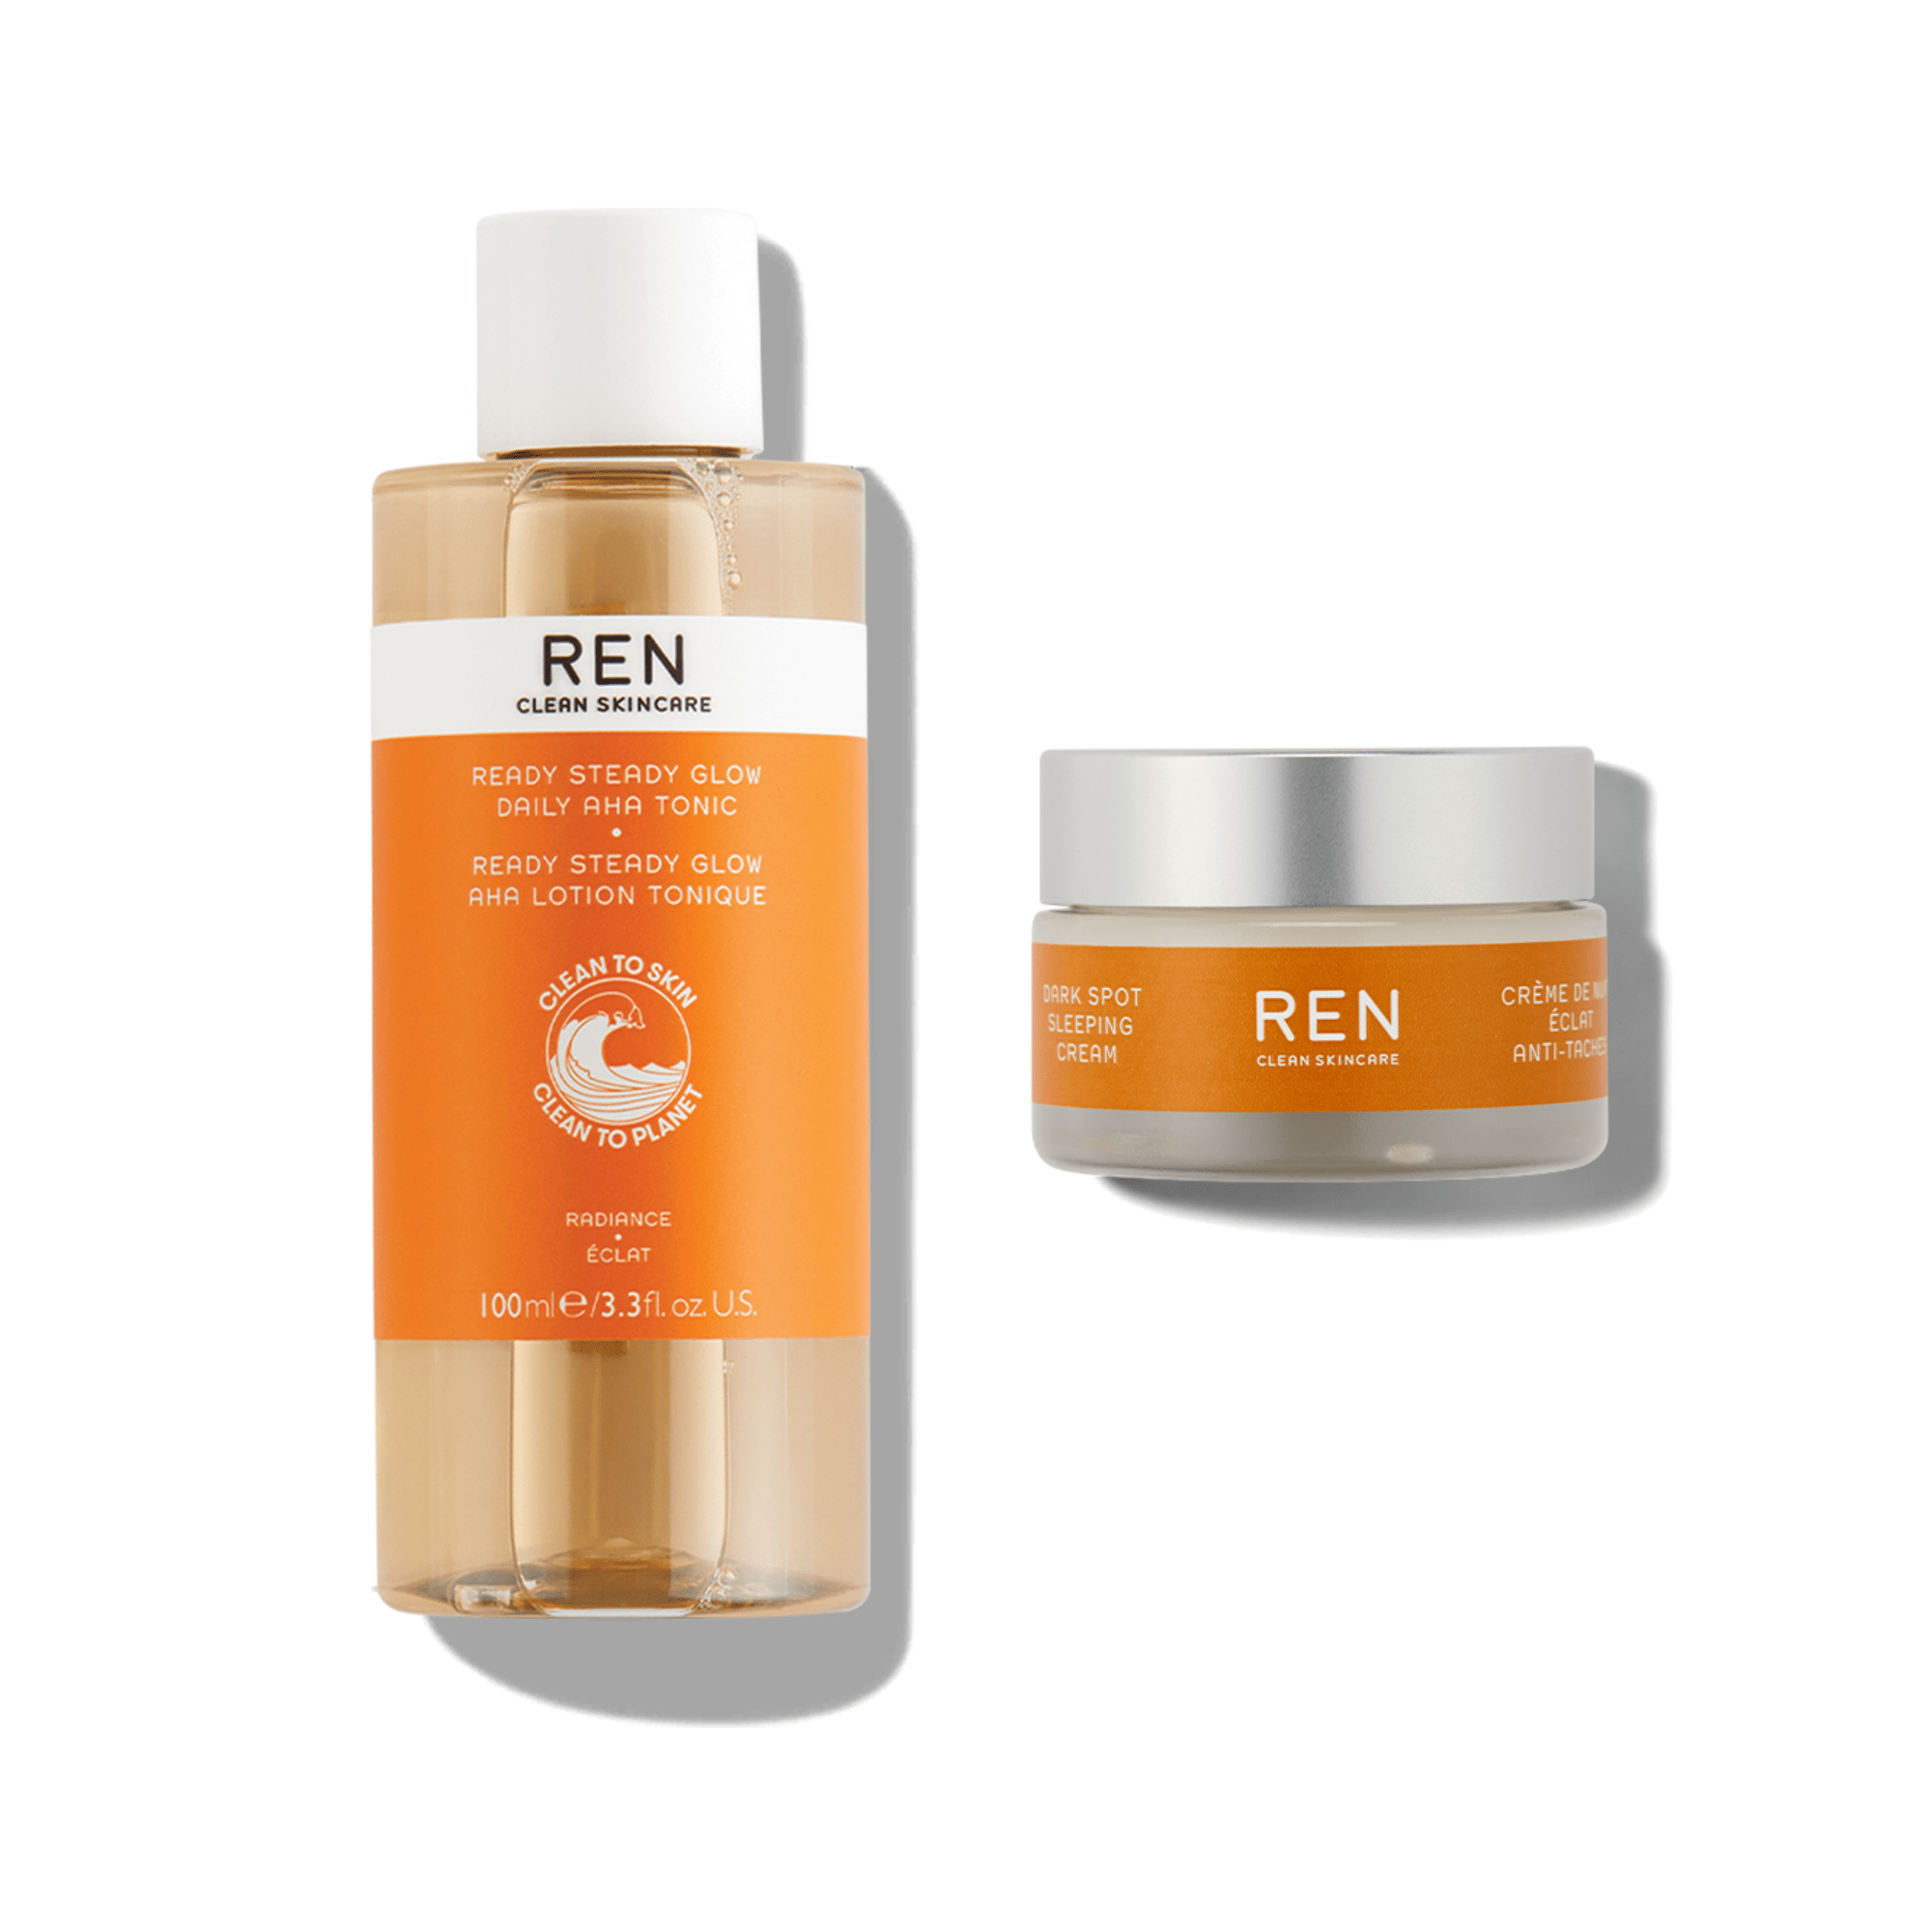 ren-clean-skincare-on-the-glow-starter-duo-31497040068650.png